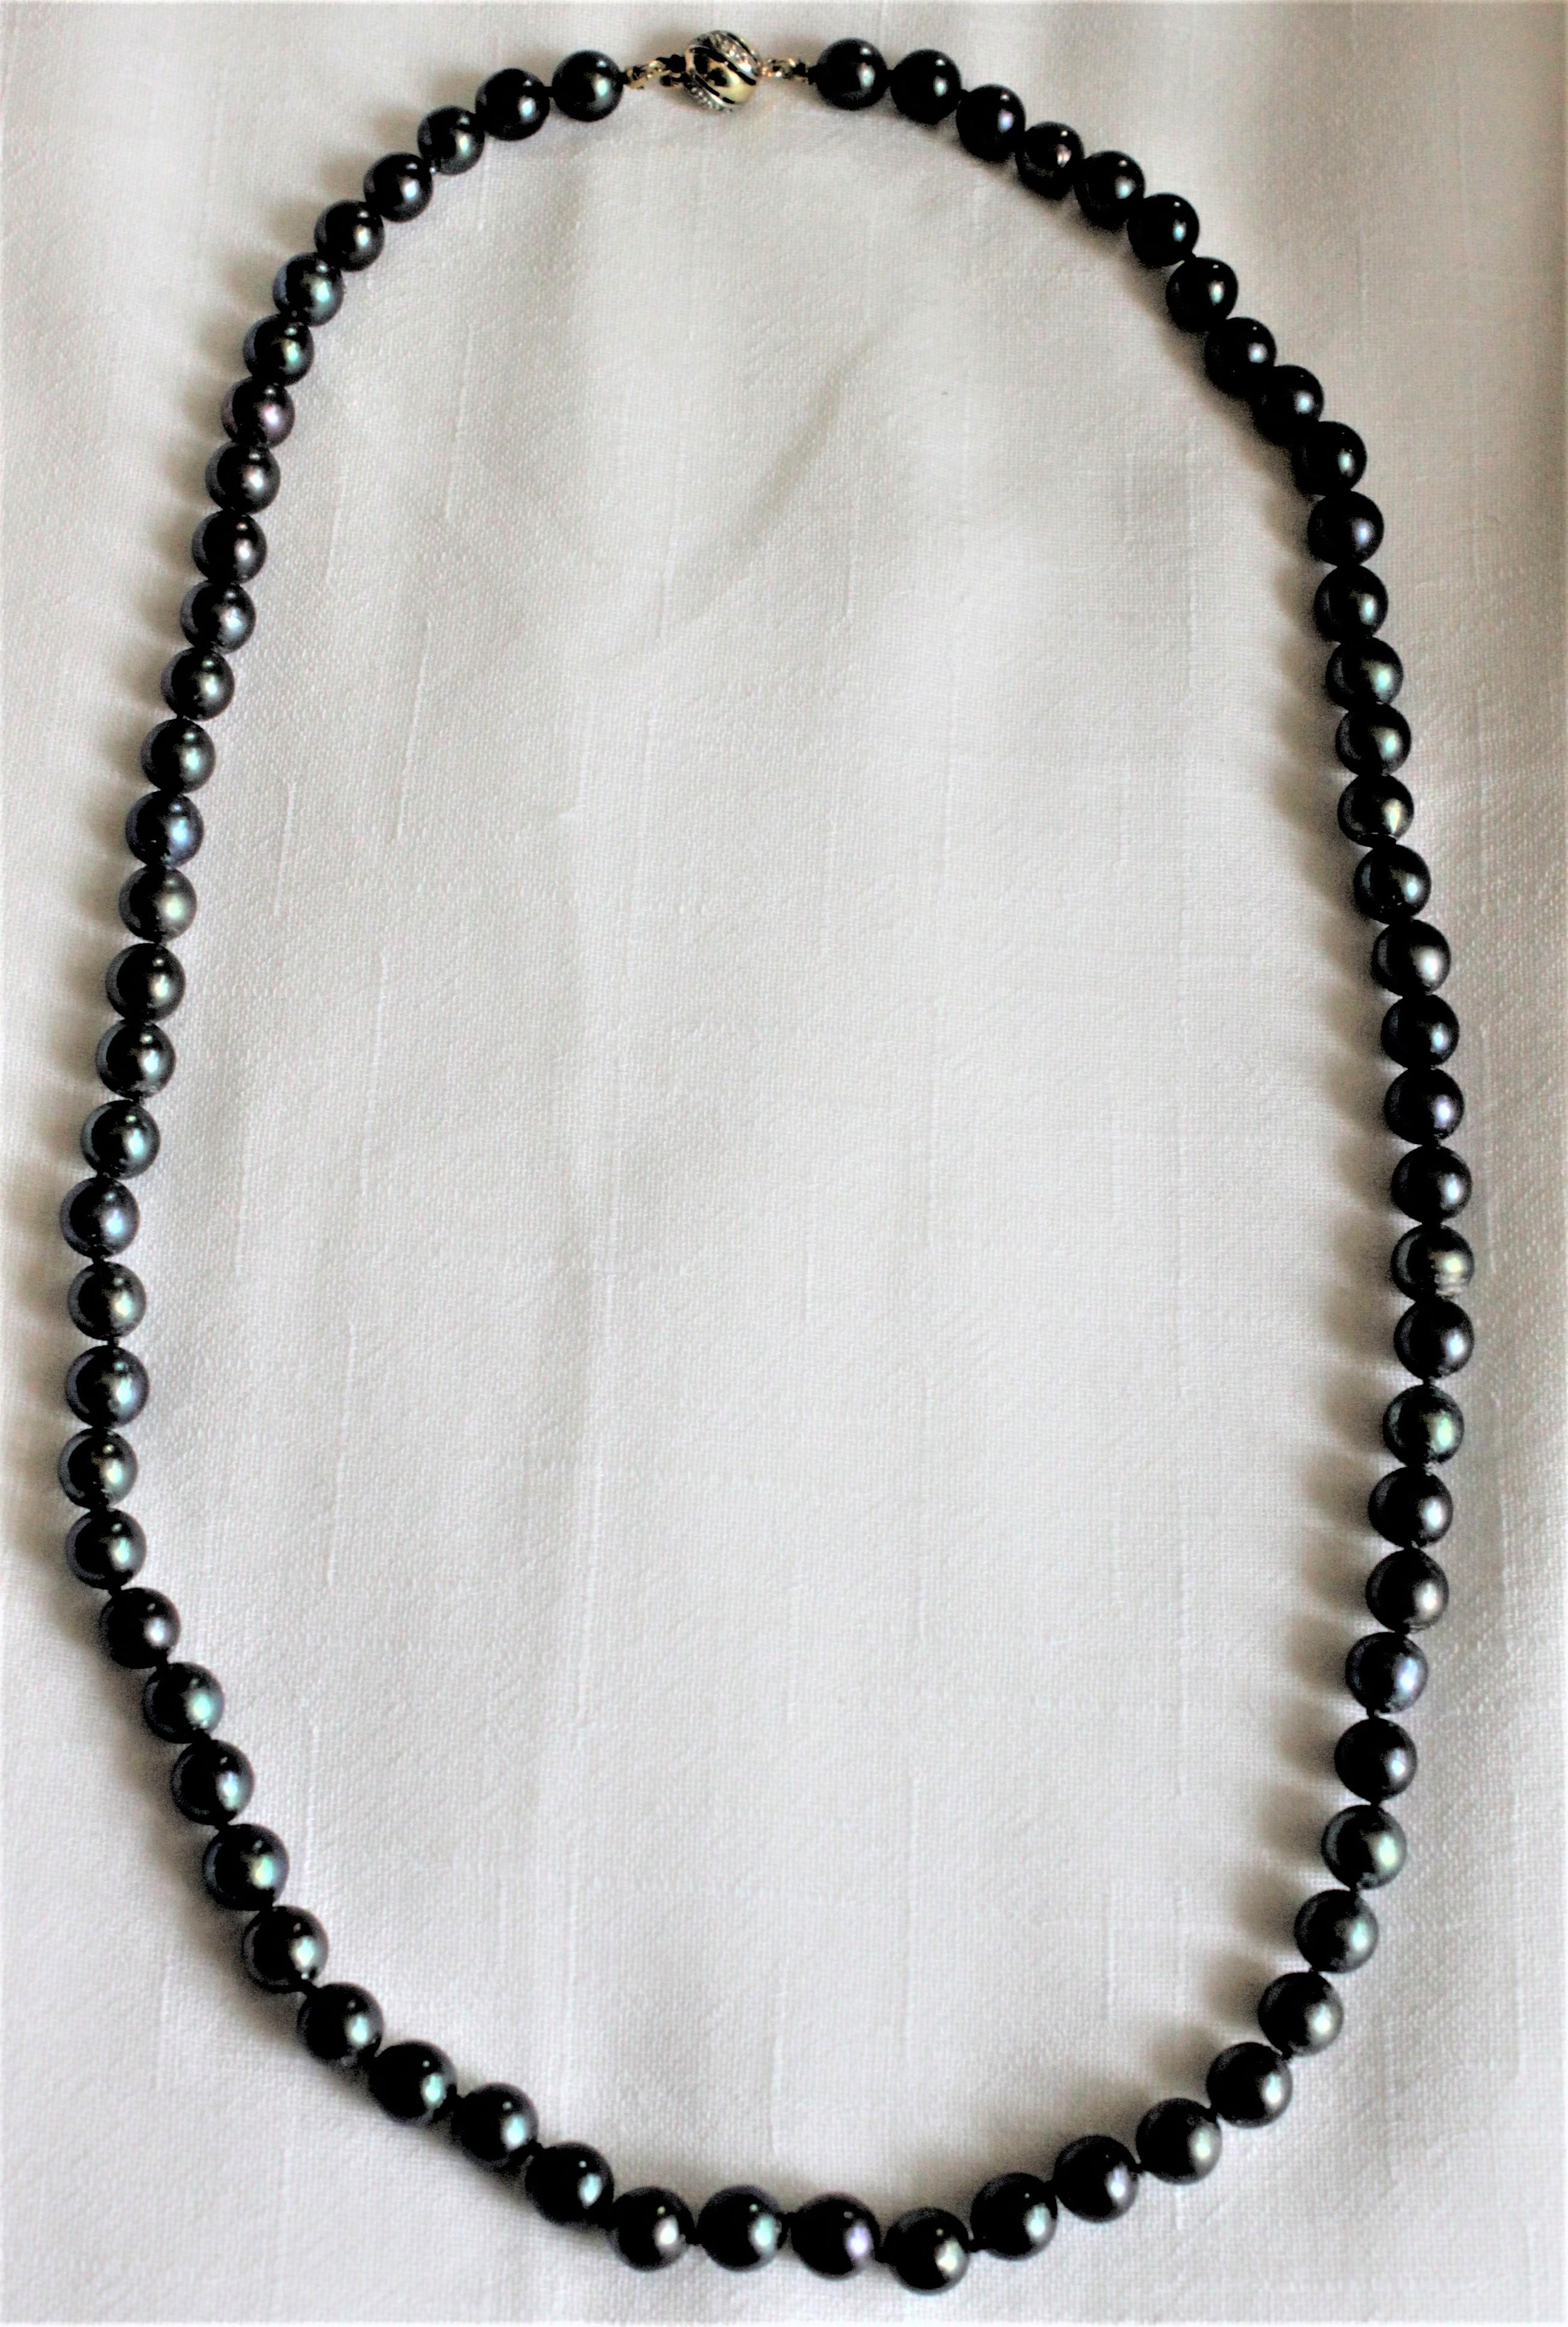 This vintage women's Tahitian graduated black pearl necklace is unmarked with respect to a specific maker, but is marked with European gold marks and believed to originate from Italy. The pearls are presumed to be cultured, but are nicely matched